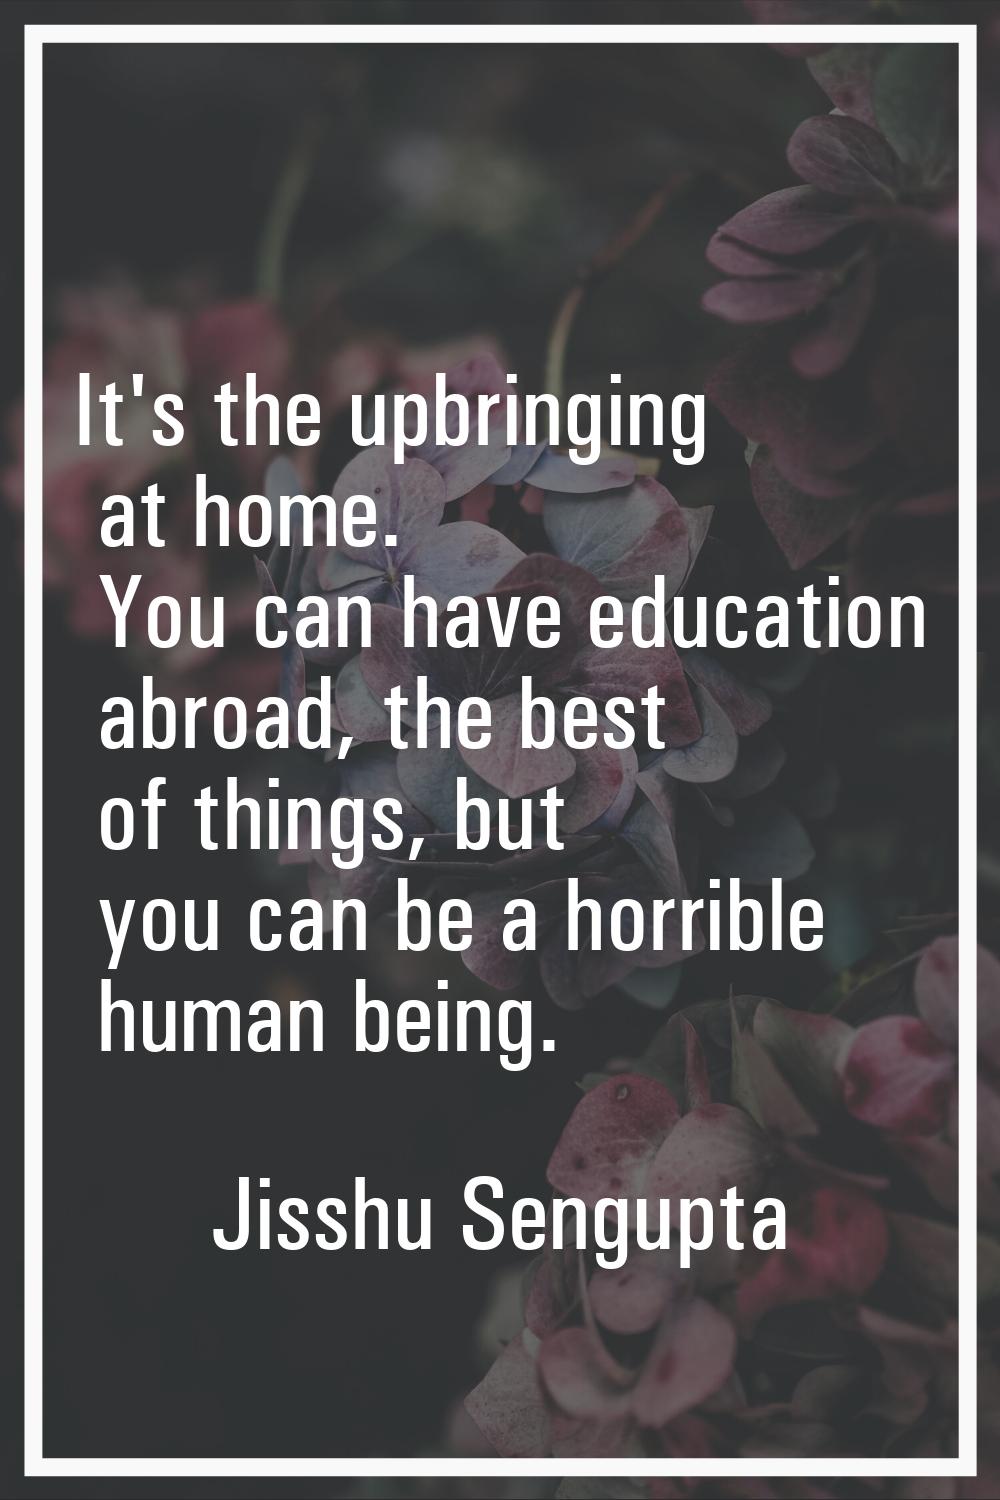 It's the upbringing at home. You can have education abroad, the best of things, but you can be a ho